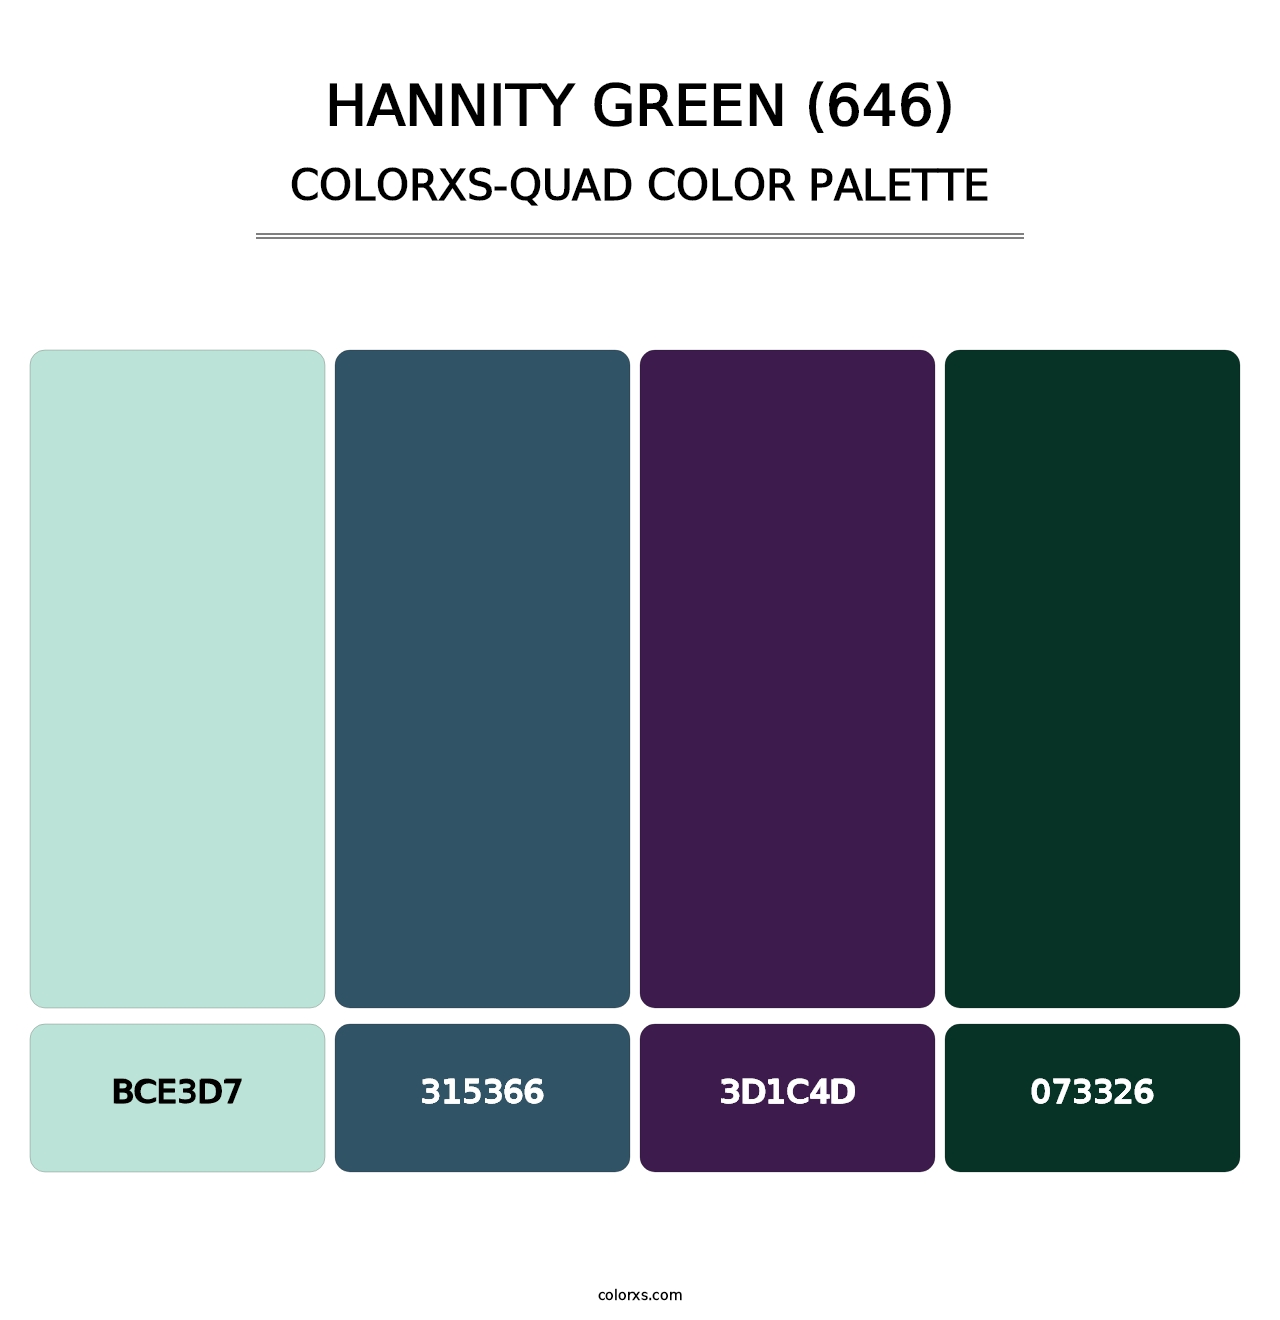 Hannity Green (646) - Colorxs Quad Palette